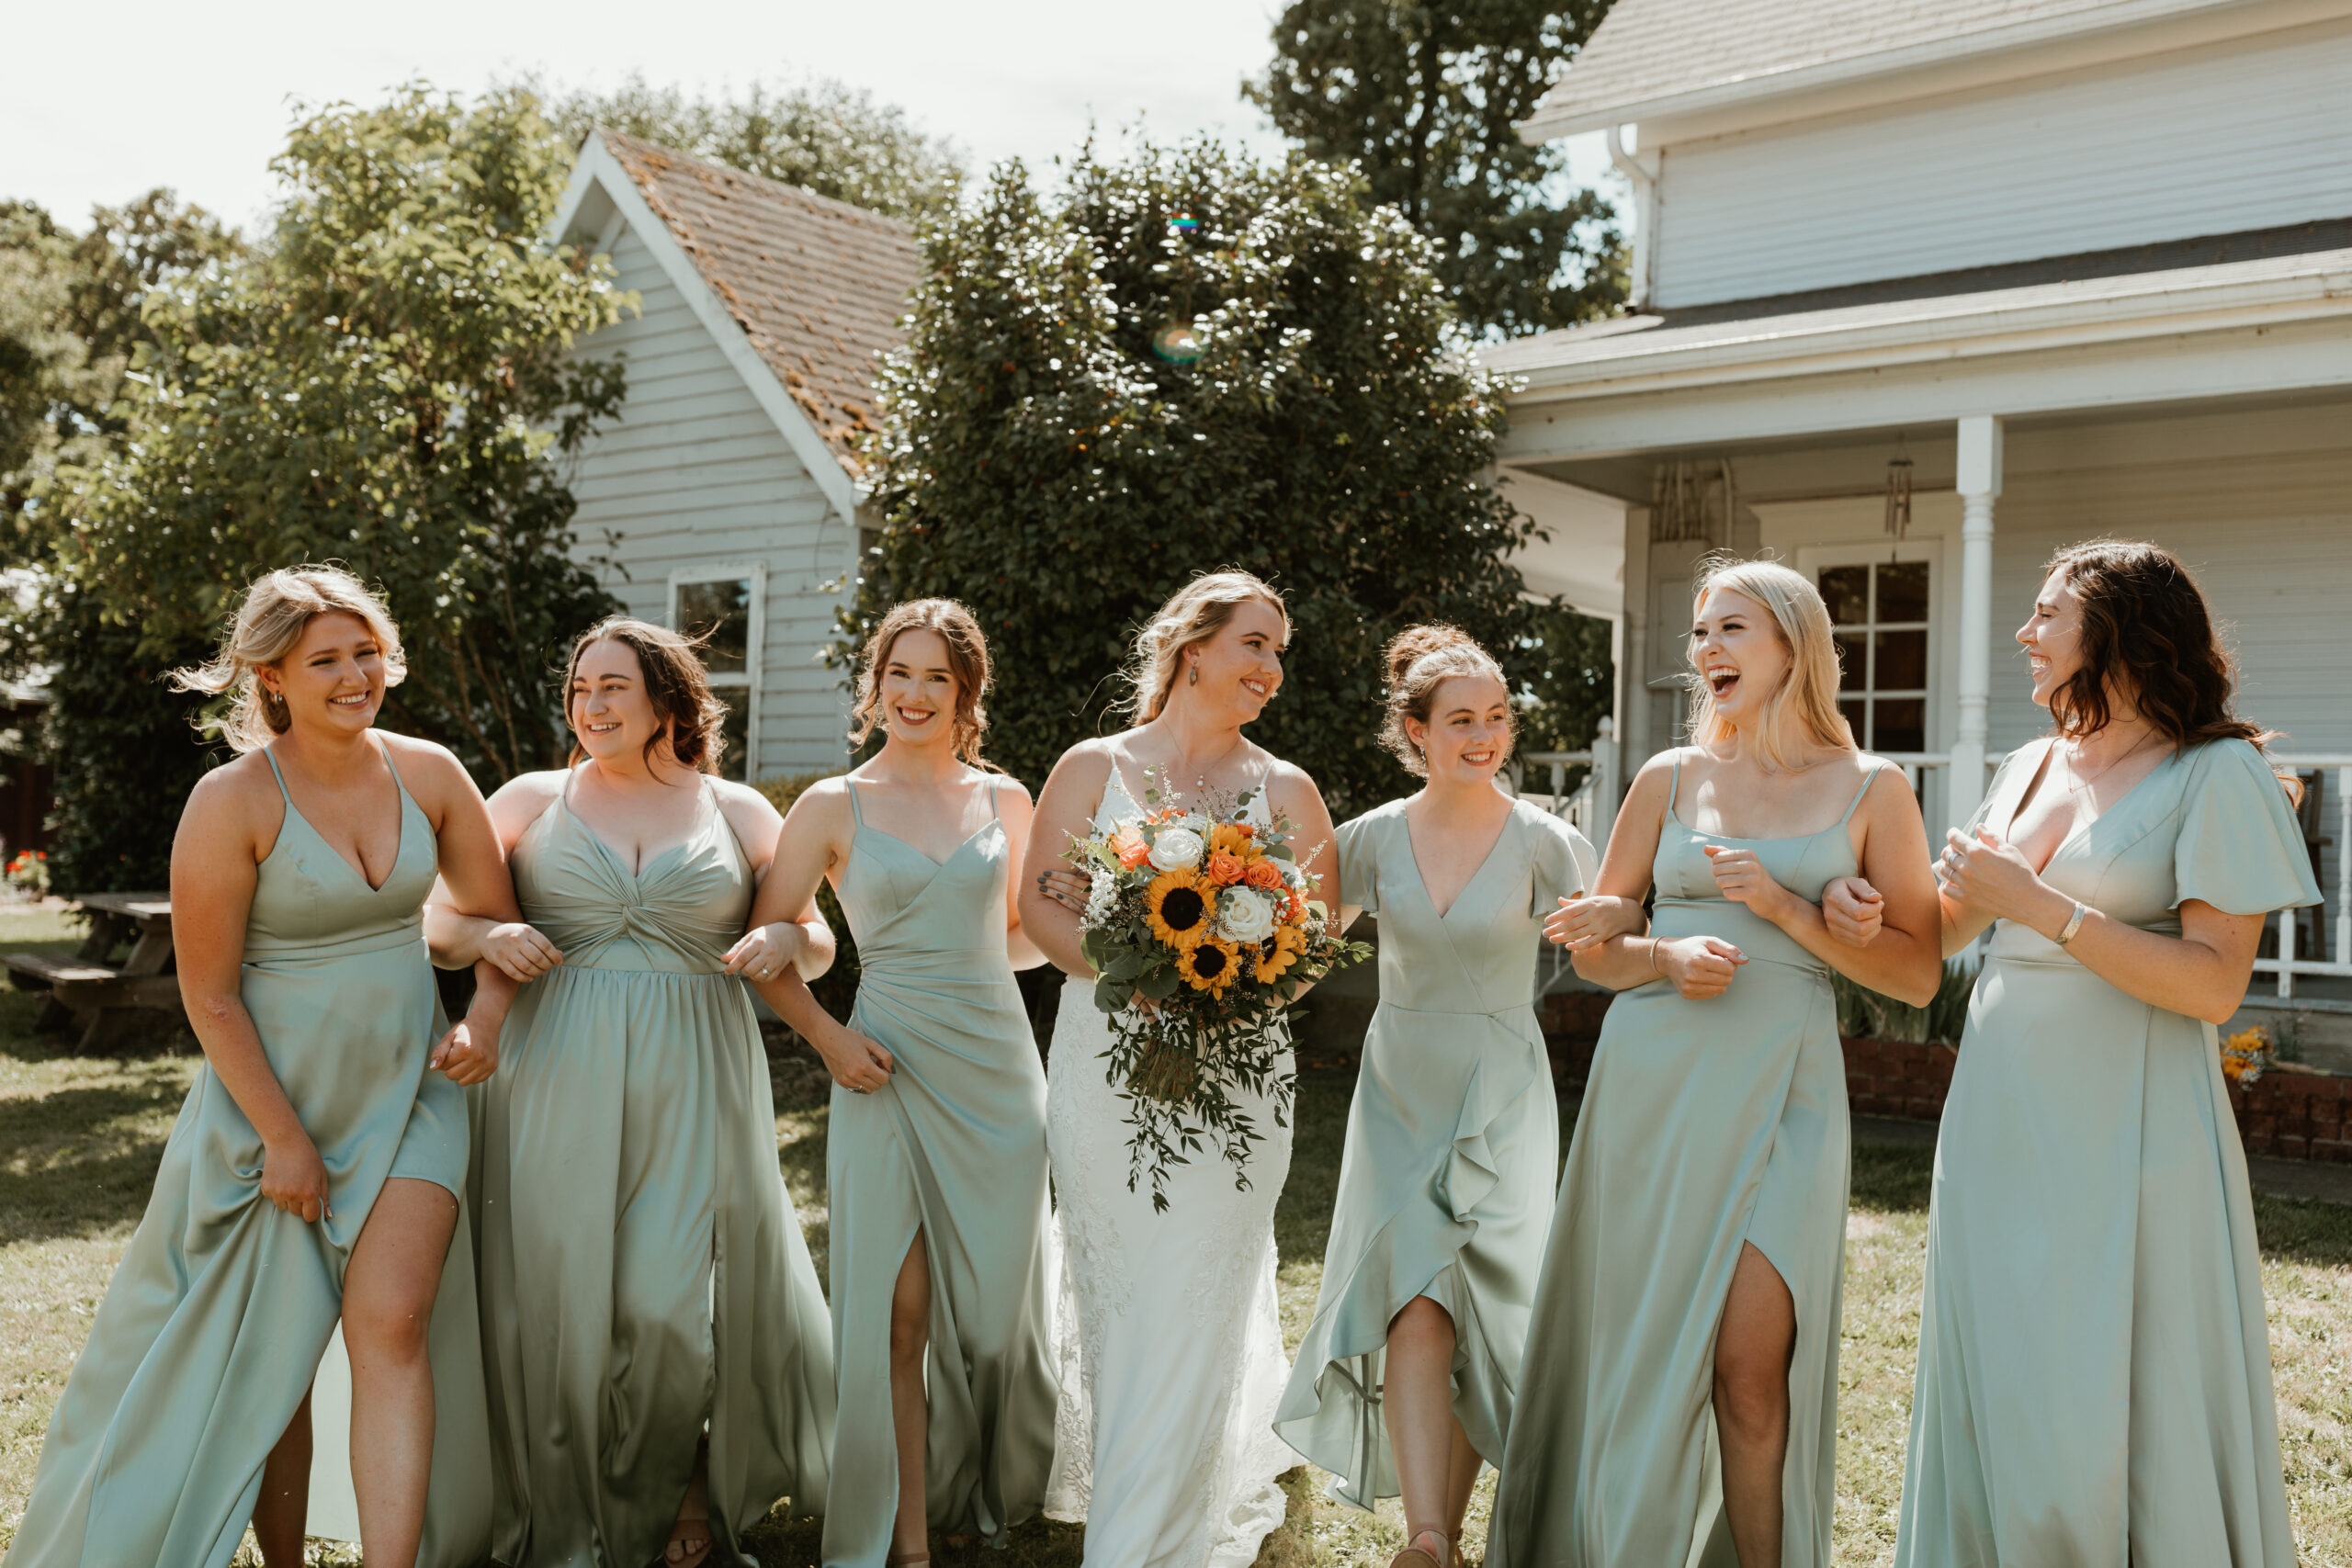 bridesmaids laughing and walking together in a field